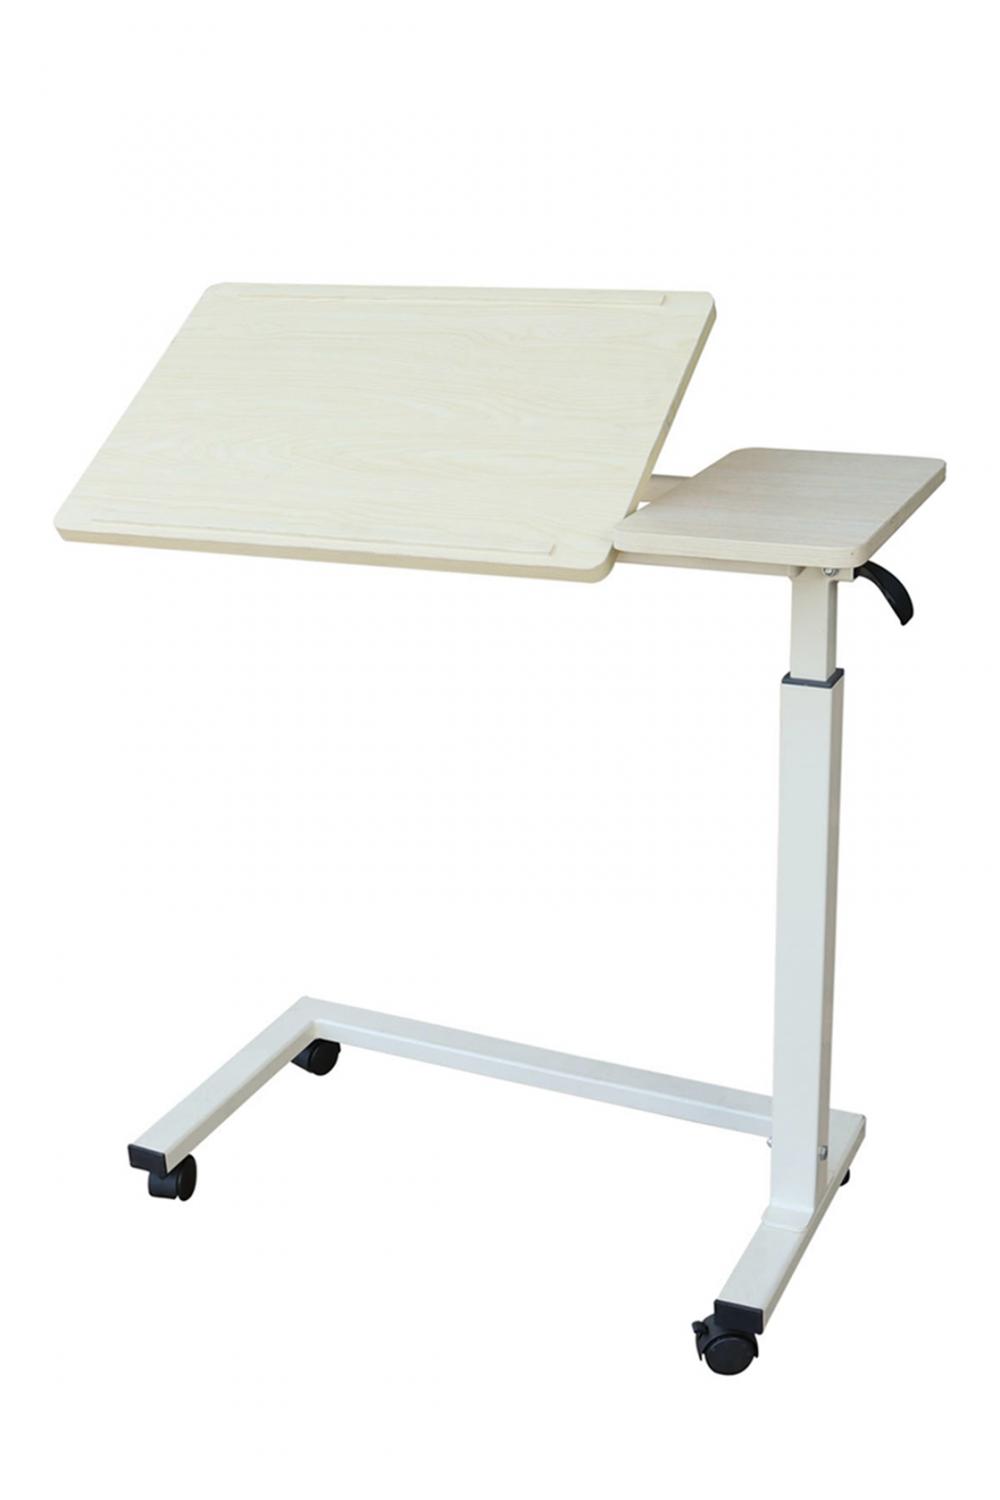 Rotatable medical bedside table